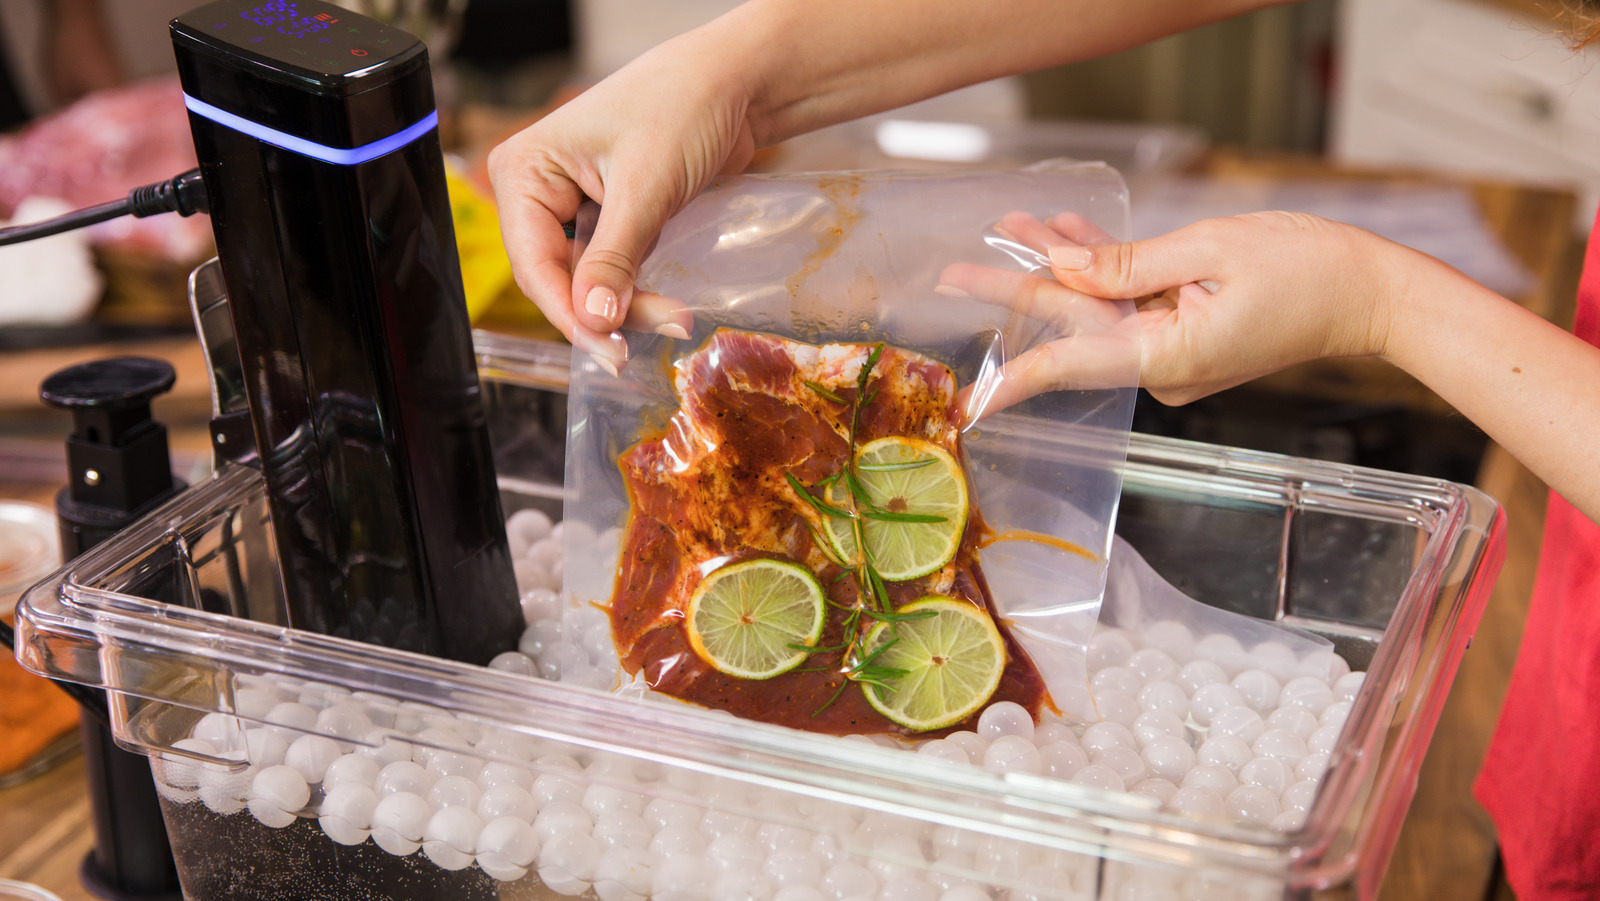 What equipment do you need to cook with the sous vide procedure?